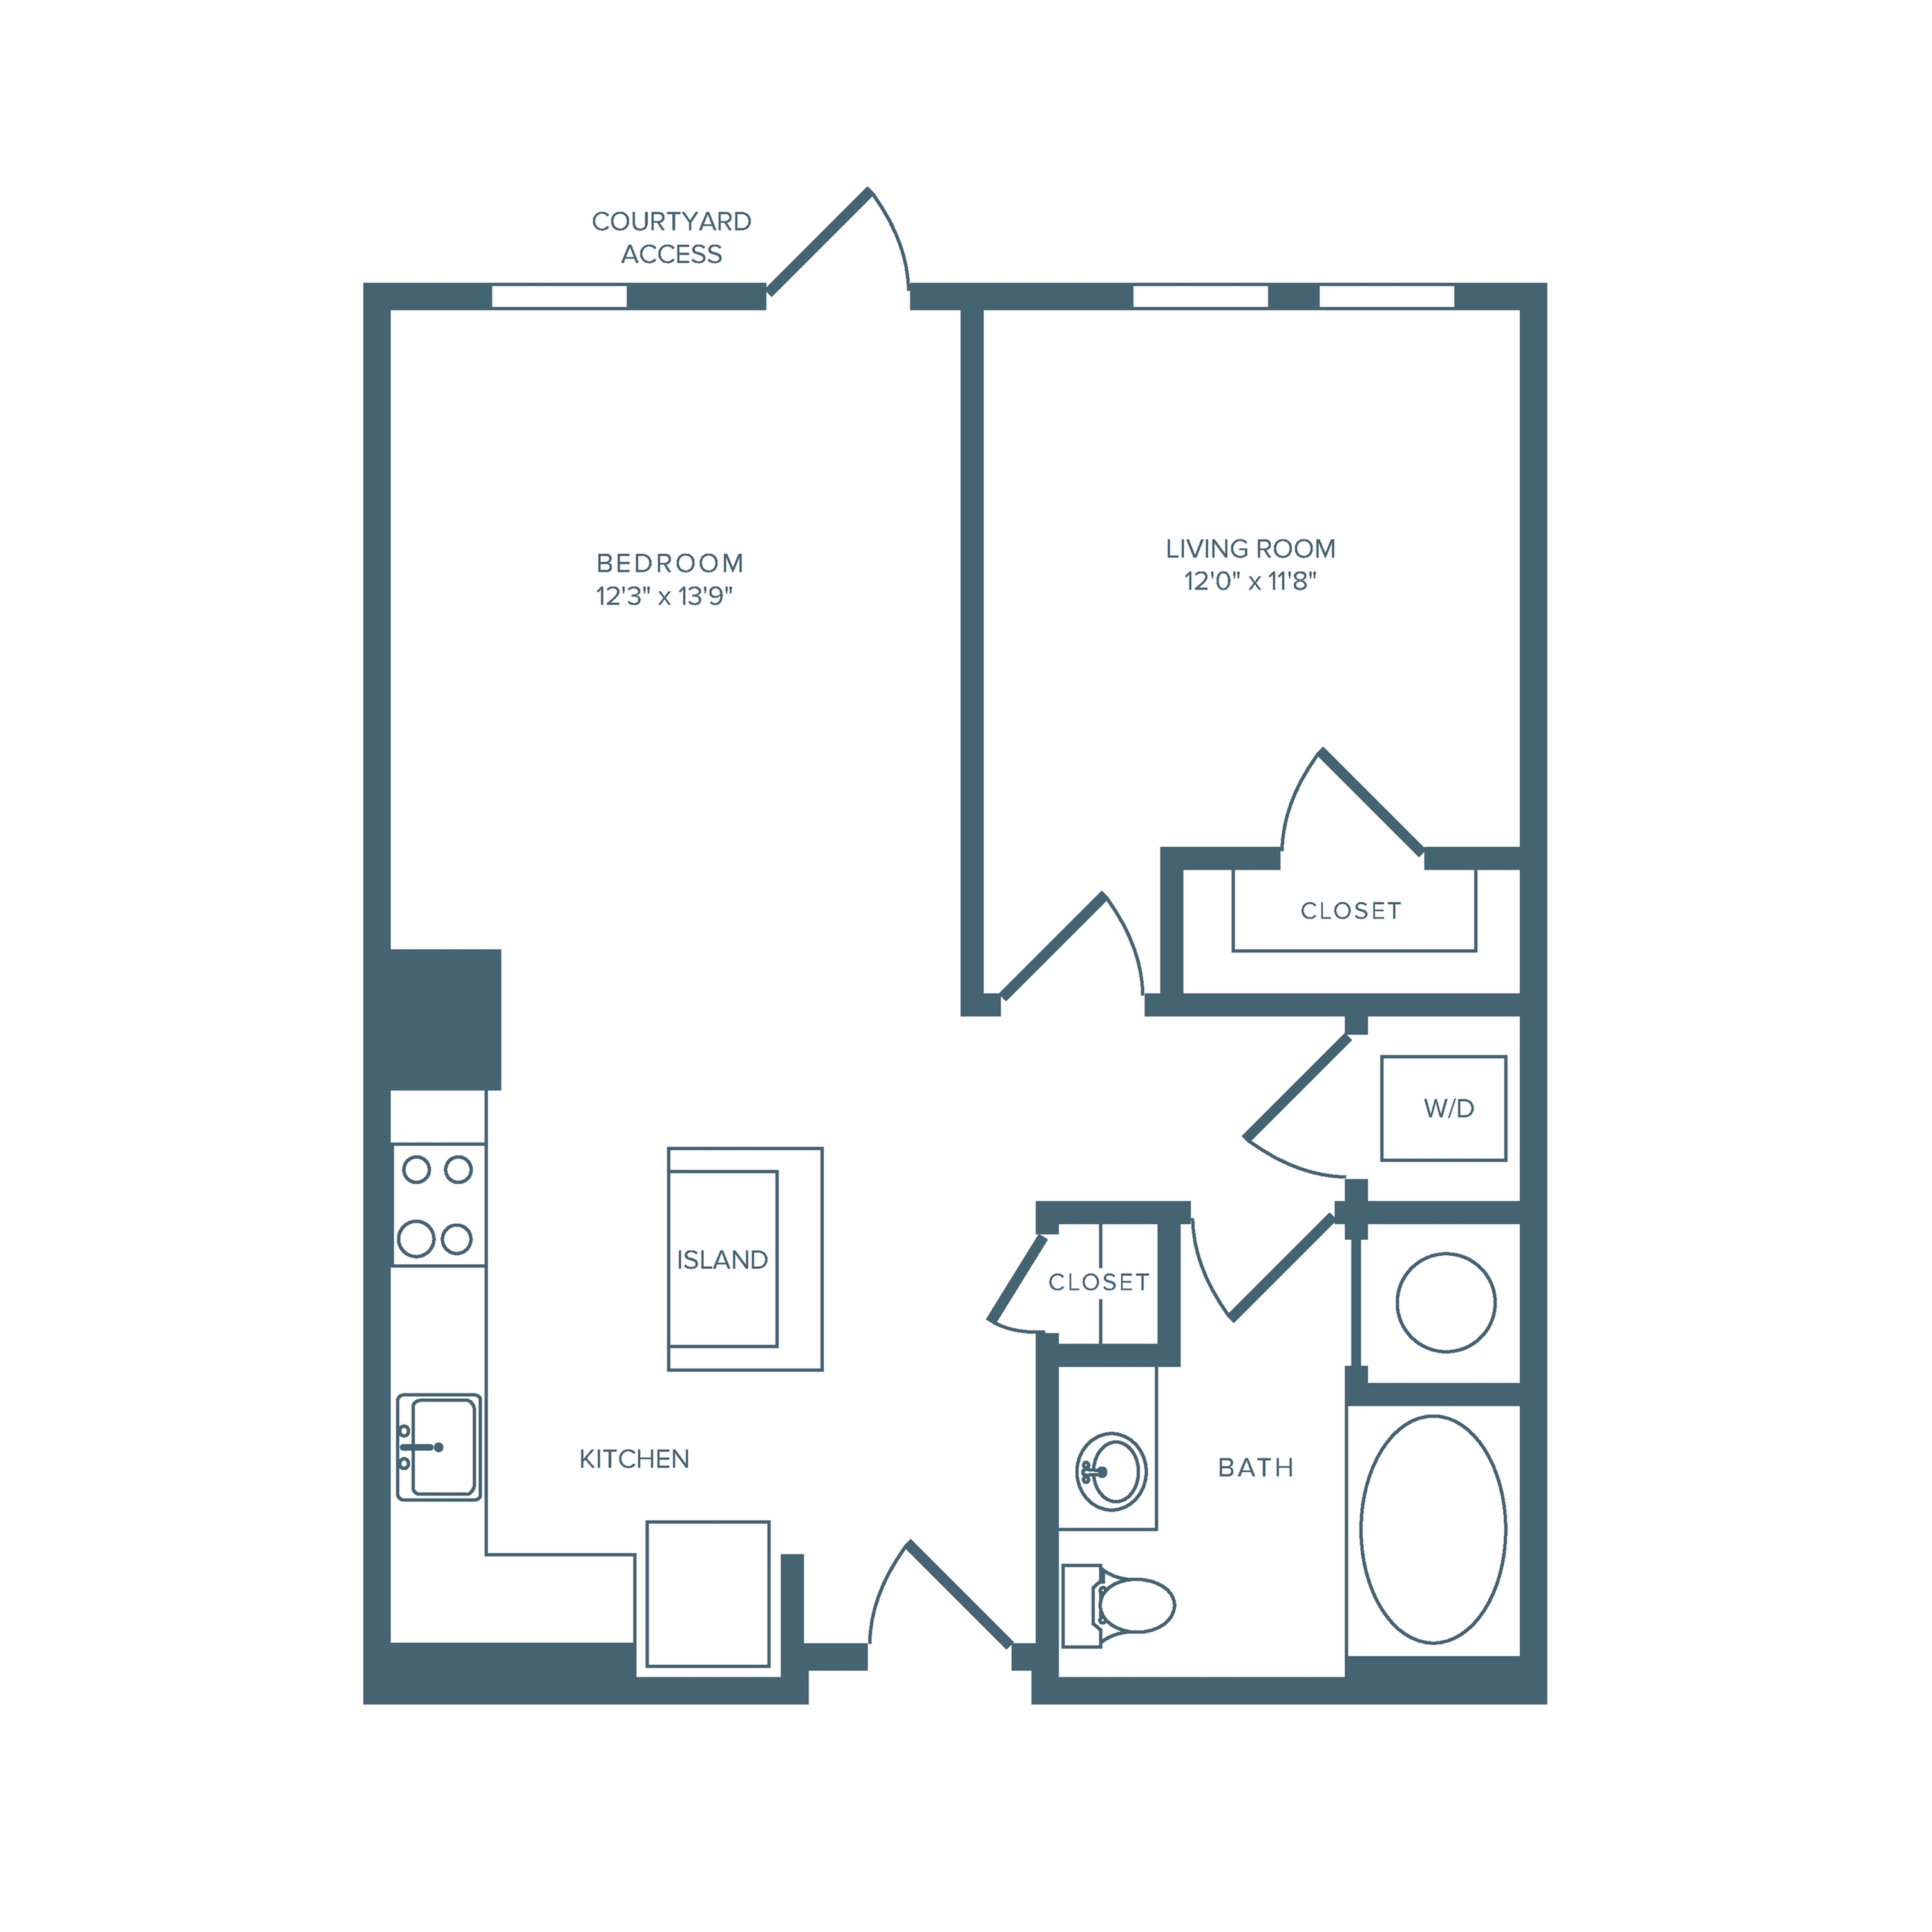 768 square foot one bedroom one bath courtyard access apartment floorplan image